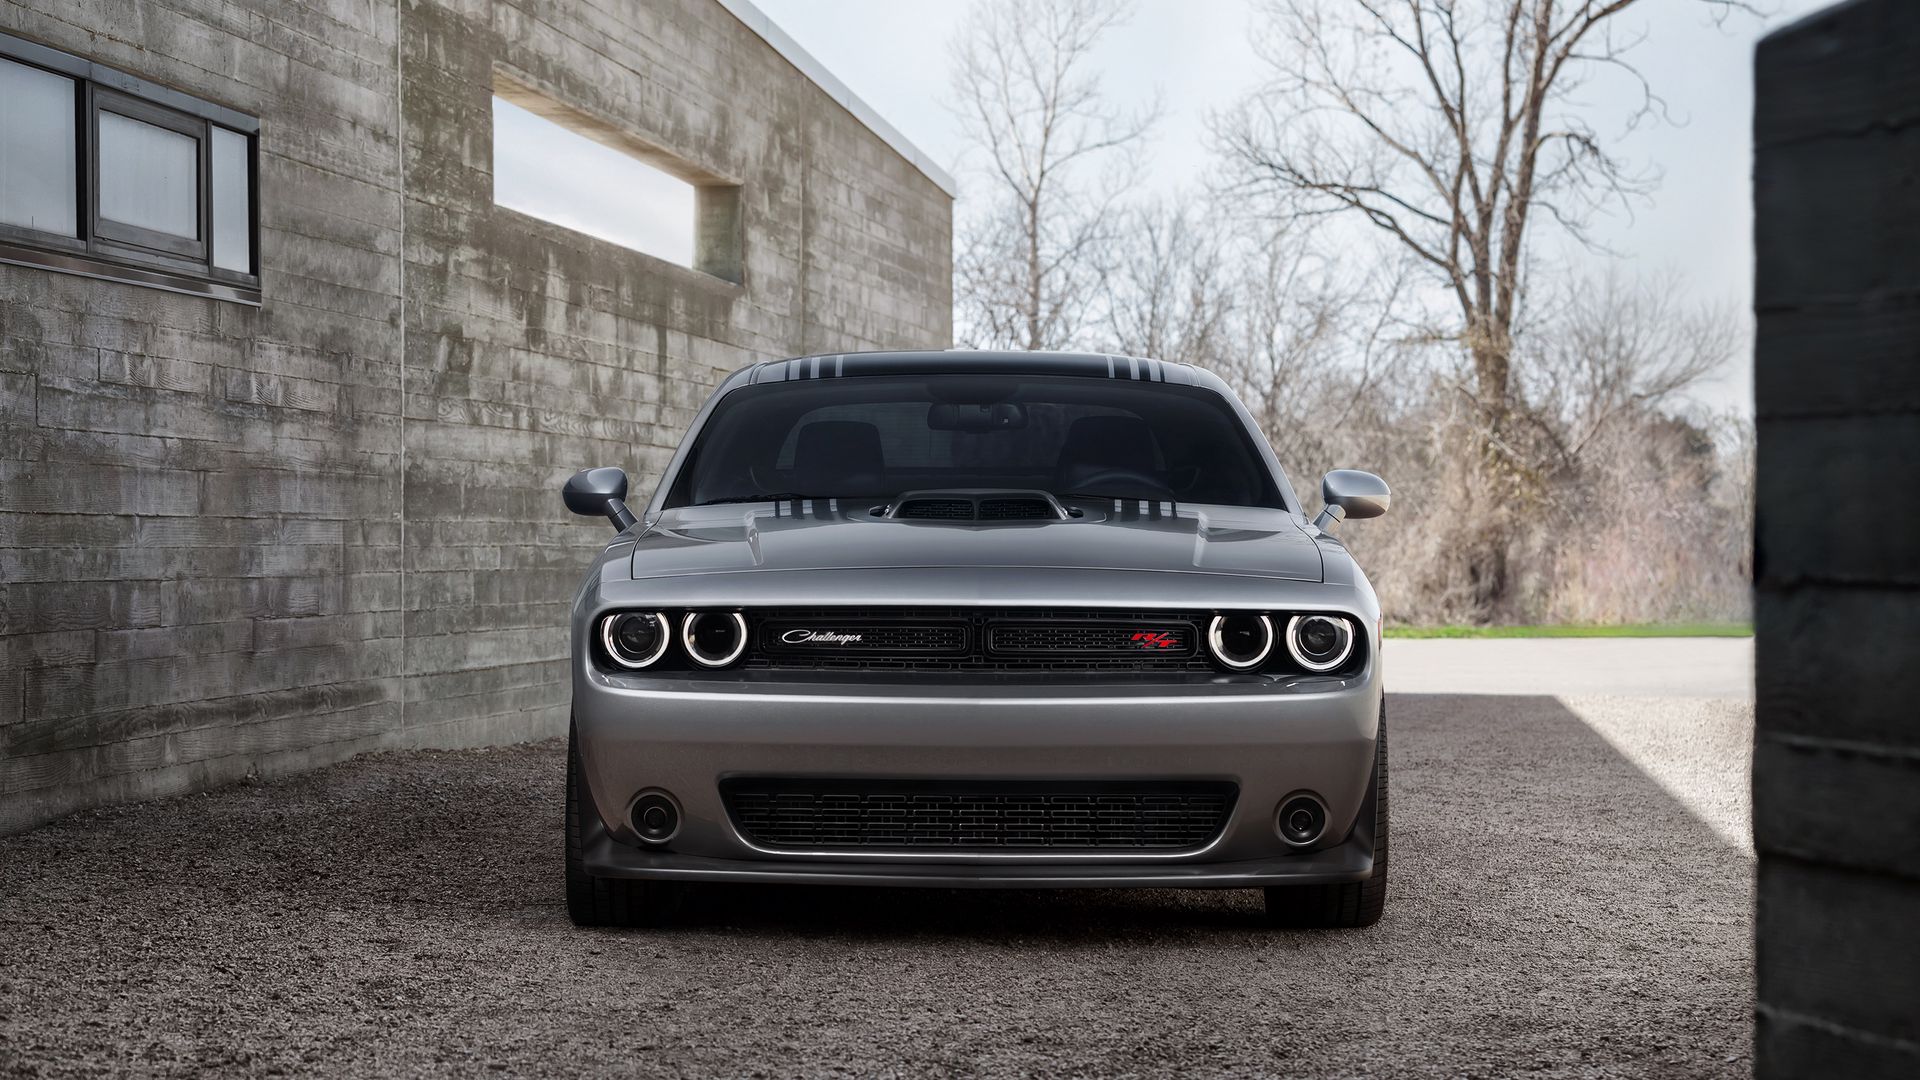 2015 Dodge, Challenger, Gray, Front, View Wallpapers Free Download